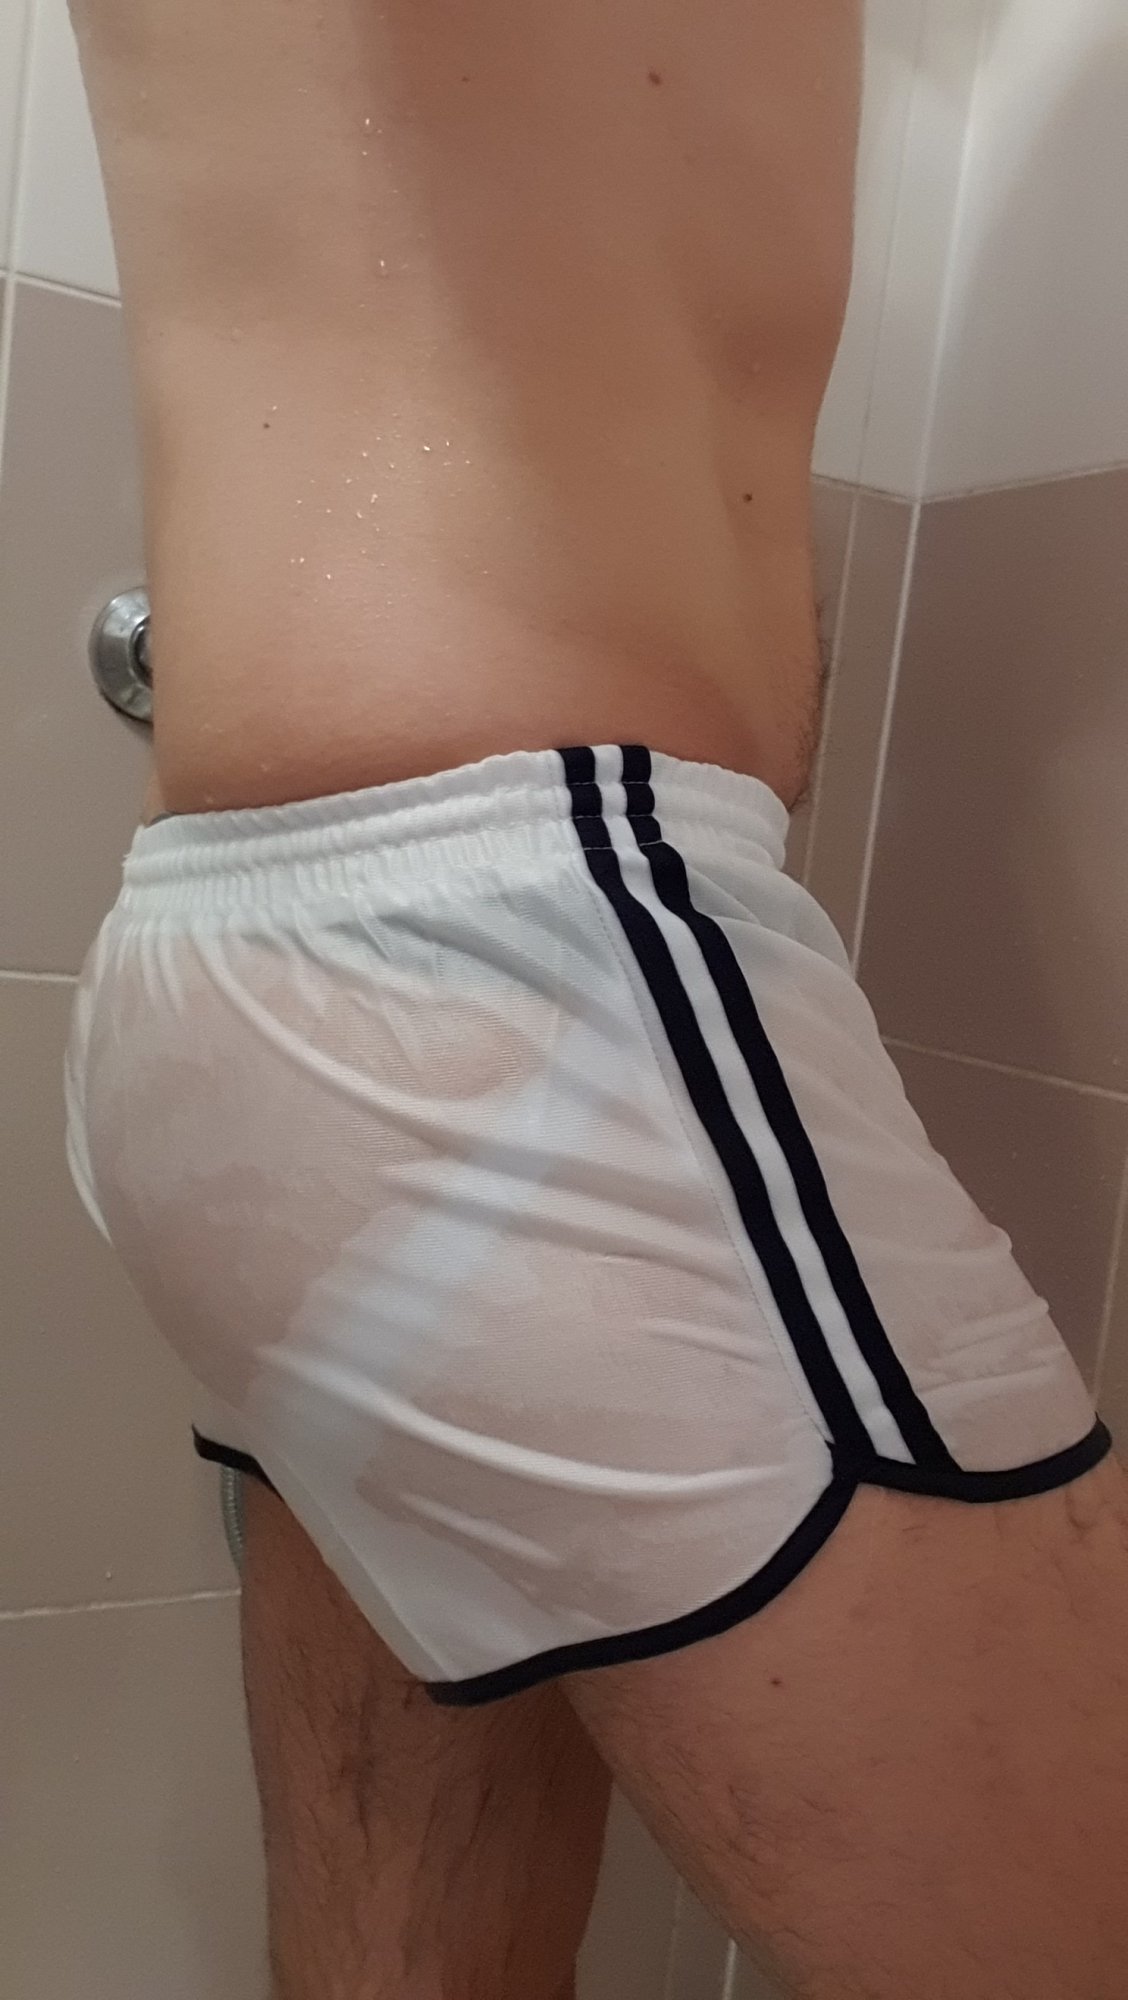 Looking for a new beach shorts what do you think?